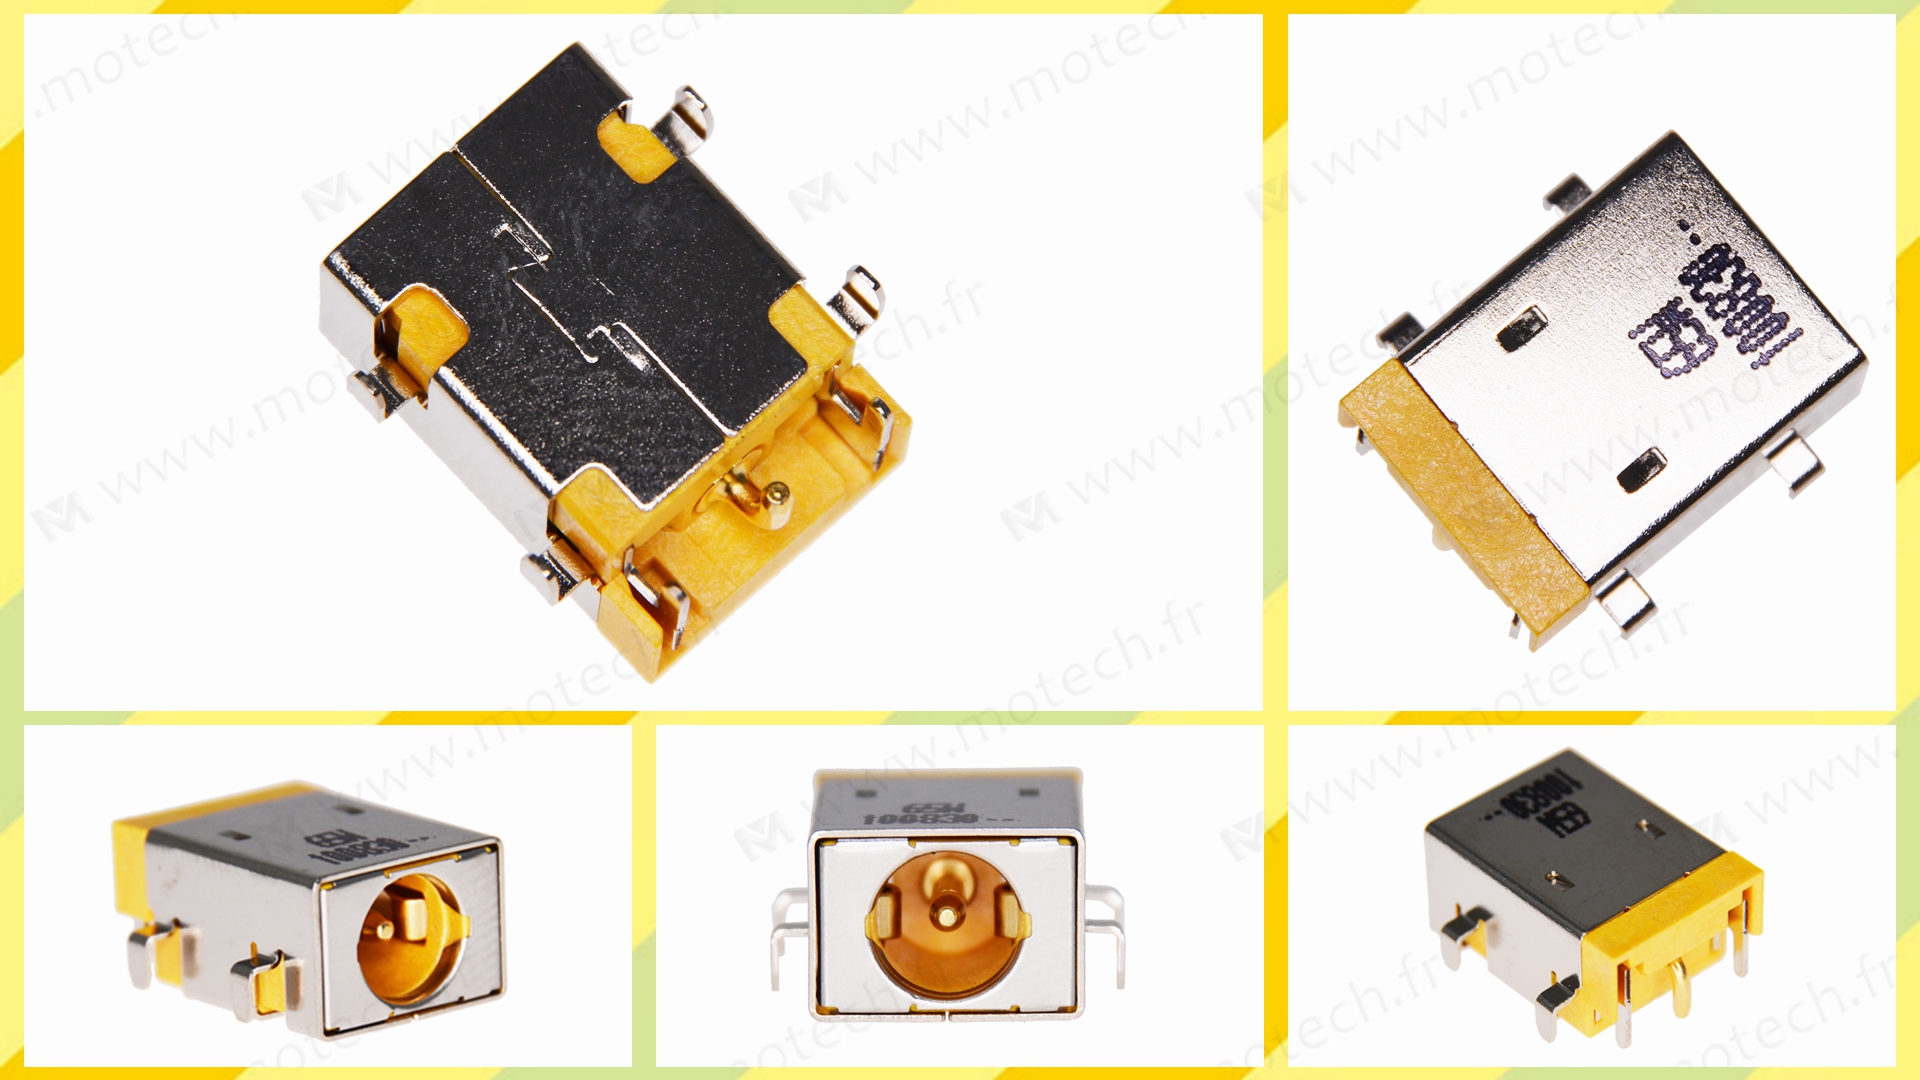 Acer 4253 charging connector, Acer 4253 DC Power Jack, Acer 4253 Power Jack, Acer 4253 plug, Acer 4253 Jack socket, Acer 4253 connecteur de charge, 